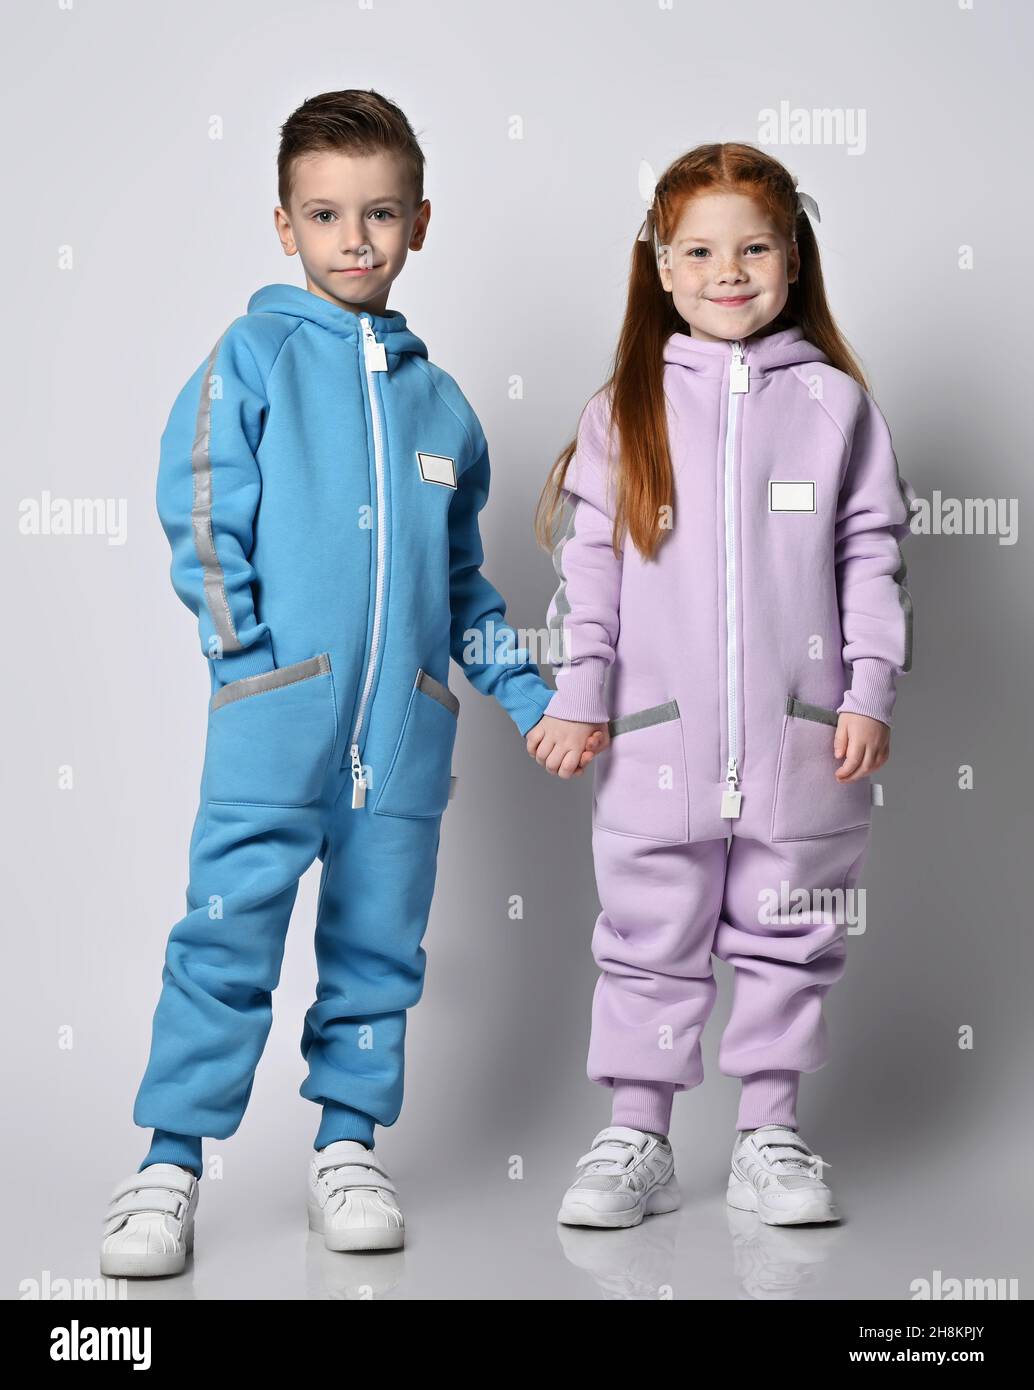 Tow cute smiling kids boy and girl in blue and pink jumpsuits with hoods and pockets stand together holding hands Stock Photo